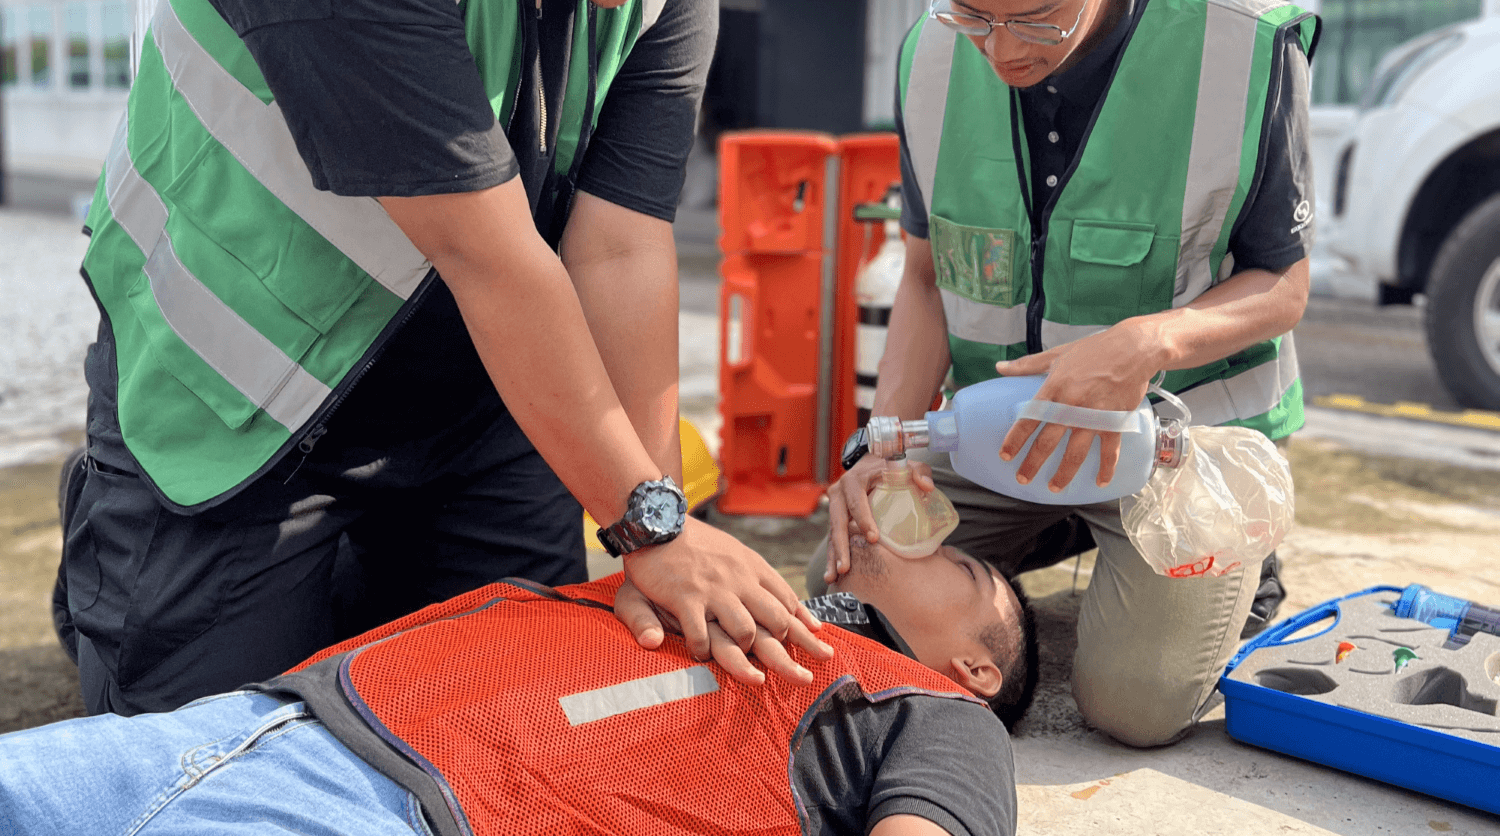 Advanced Industrial First Aid, CPR & AED Training at ASEC